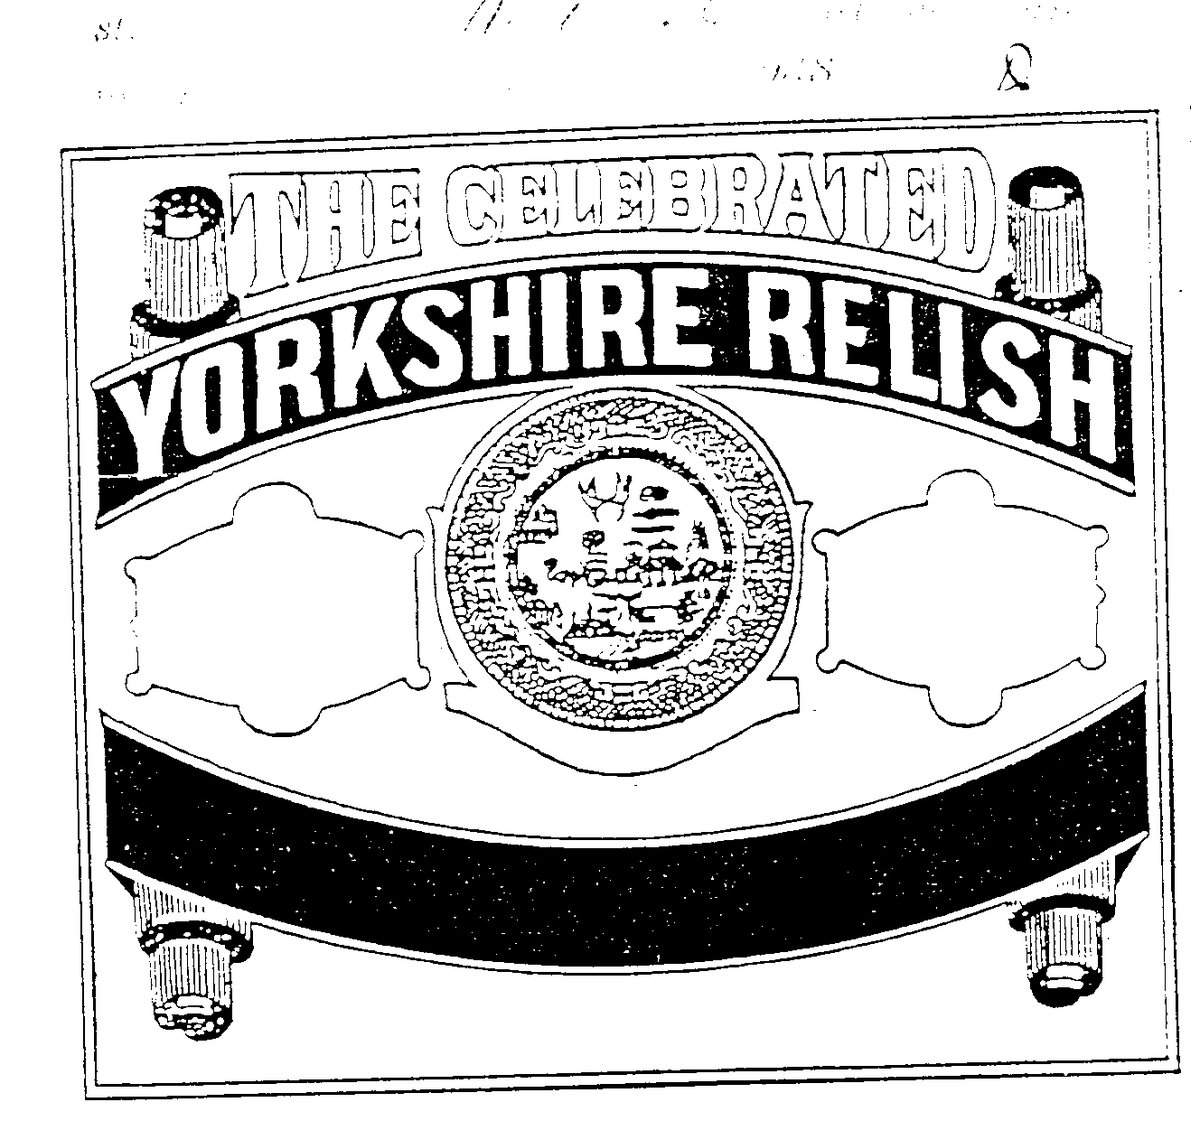 On the 1 March 1876 a trade mark was filed for 'The Celebrated Yorkshire Relish.' It was among the first registered names to be trade marked when the Trade Marks Registration Act of 1875 was passed. View trade mark number UK00000003101 here (link): trademarks.ipo.gov.uk/ipo-tmcase/pag…